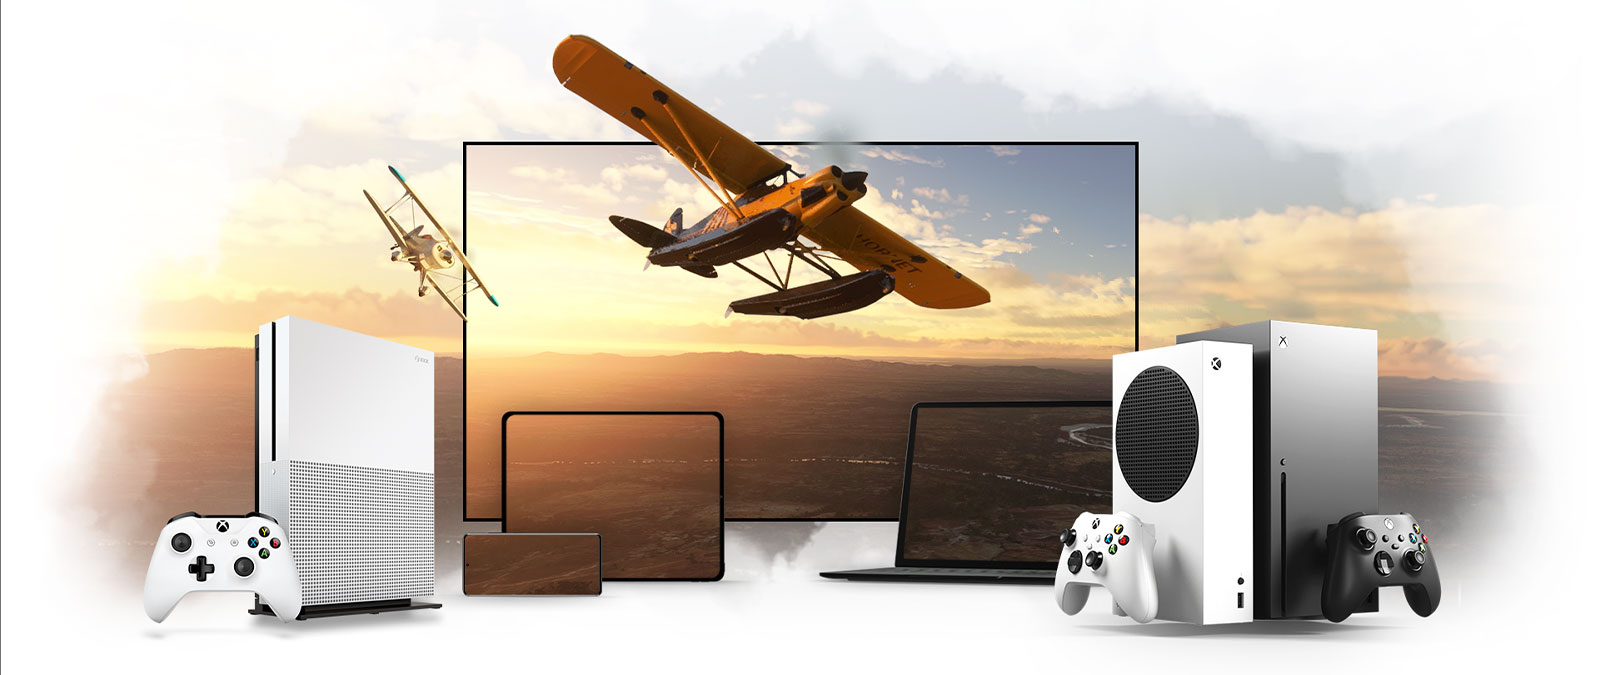 A line up of devices including a TV, an Xbox One, and an Xbox Series X, A propeller plane flies away from a sun-lit horizon.